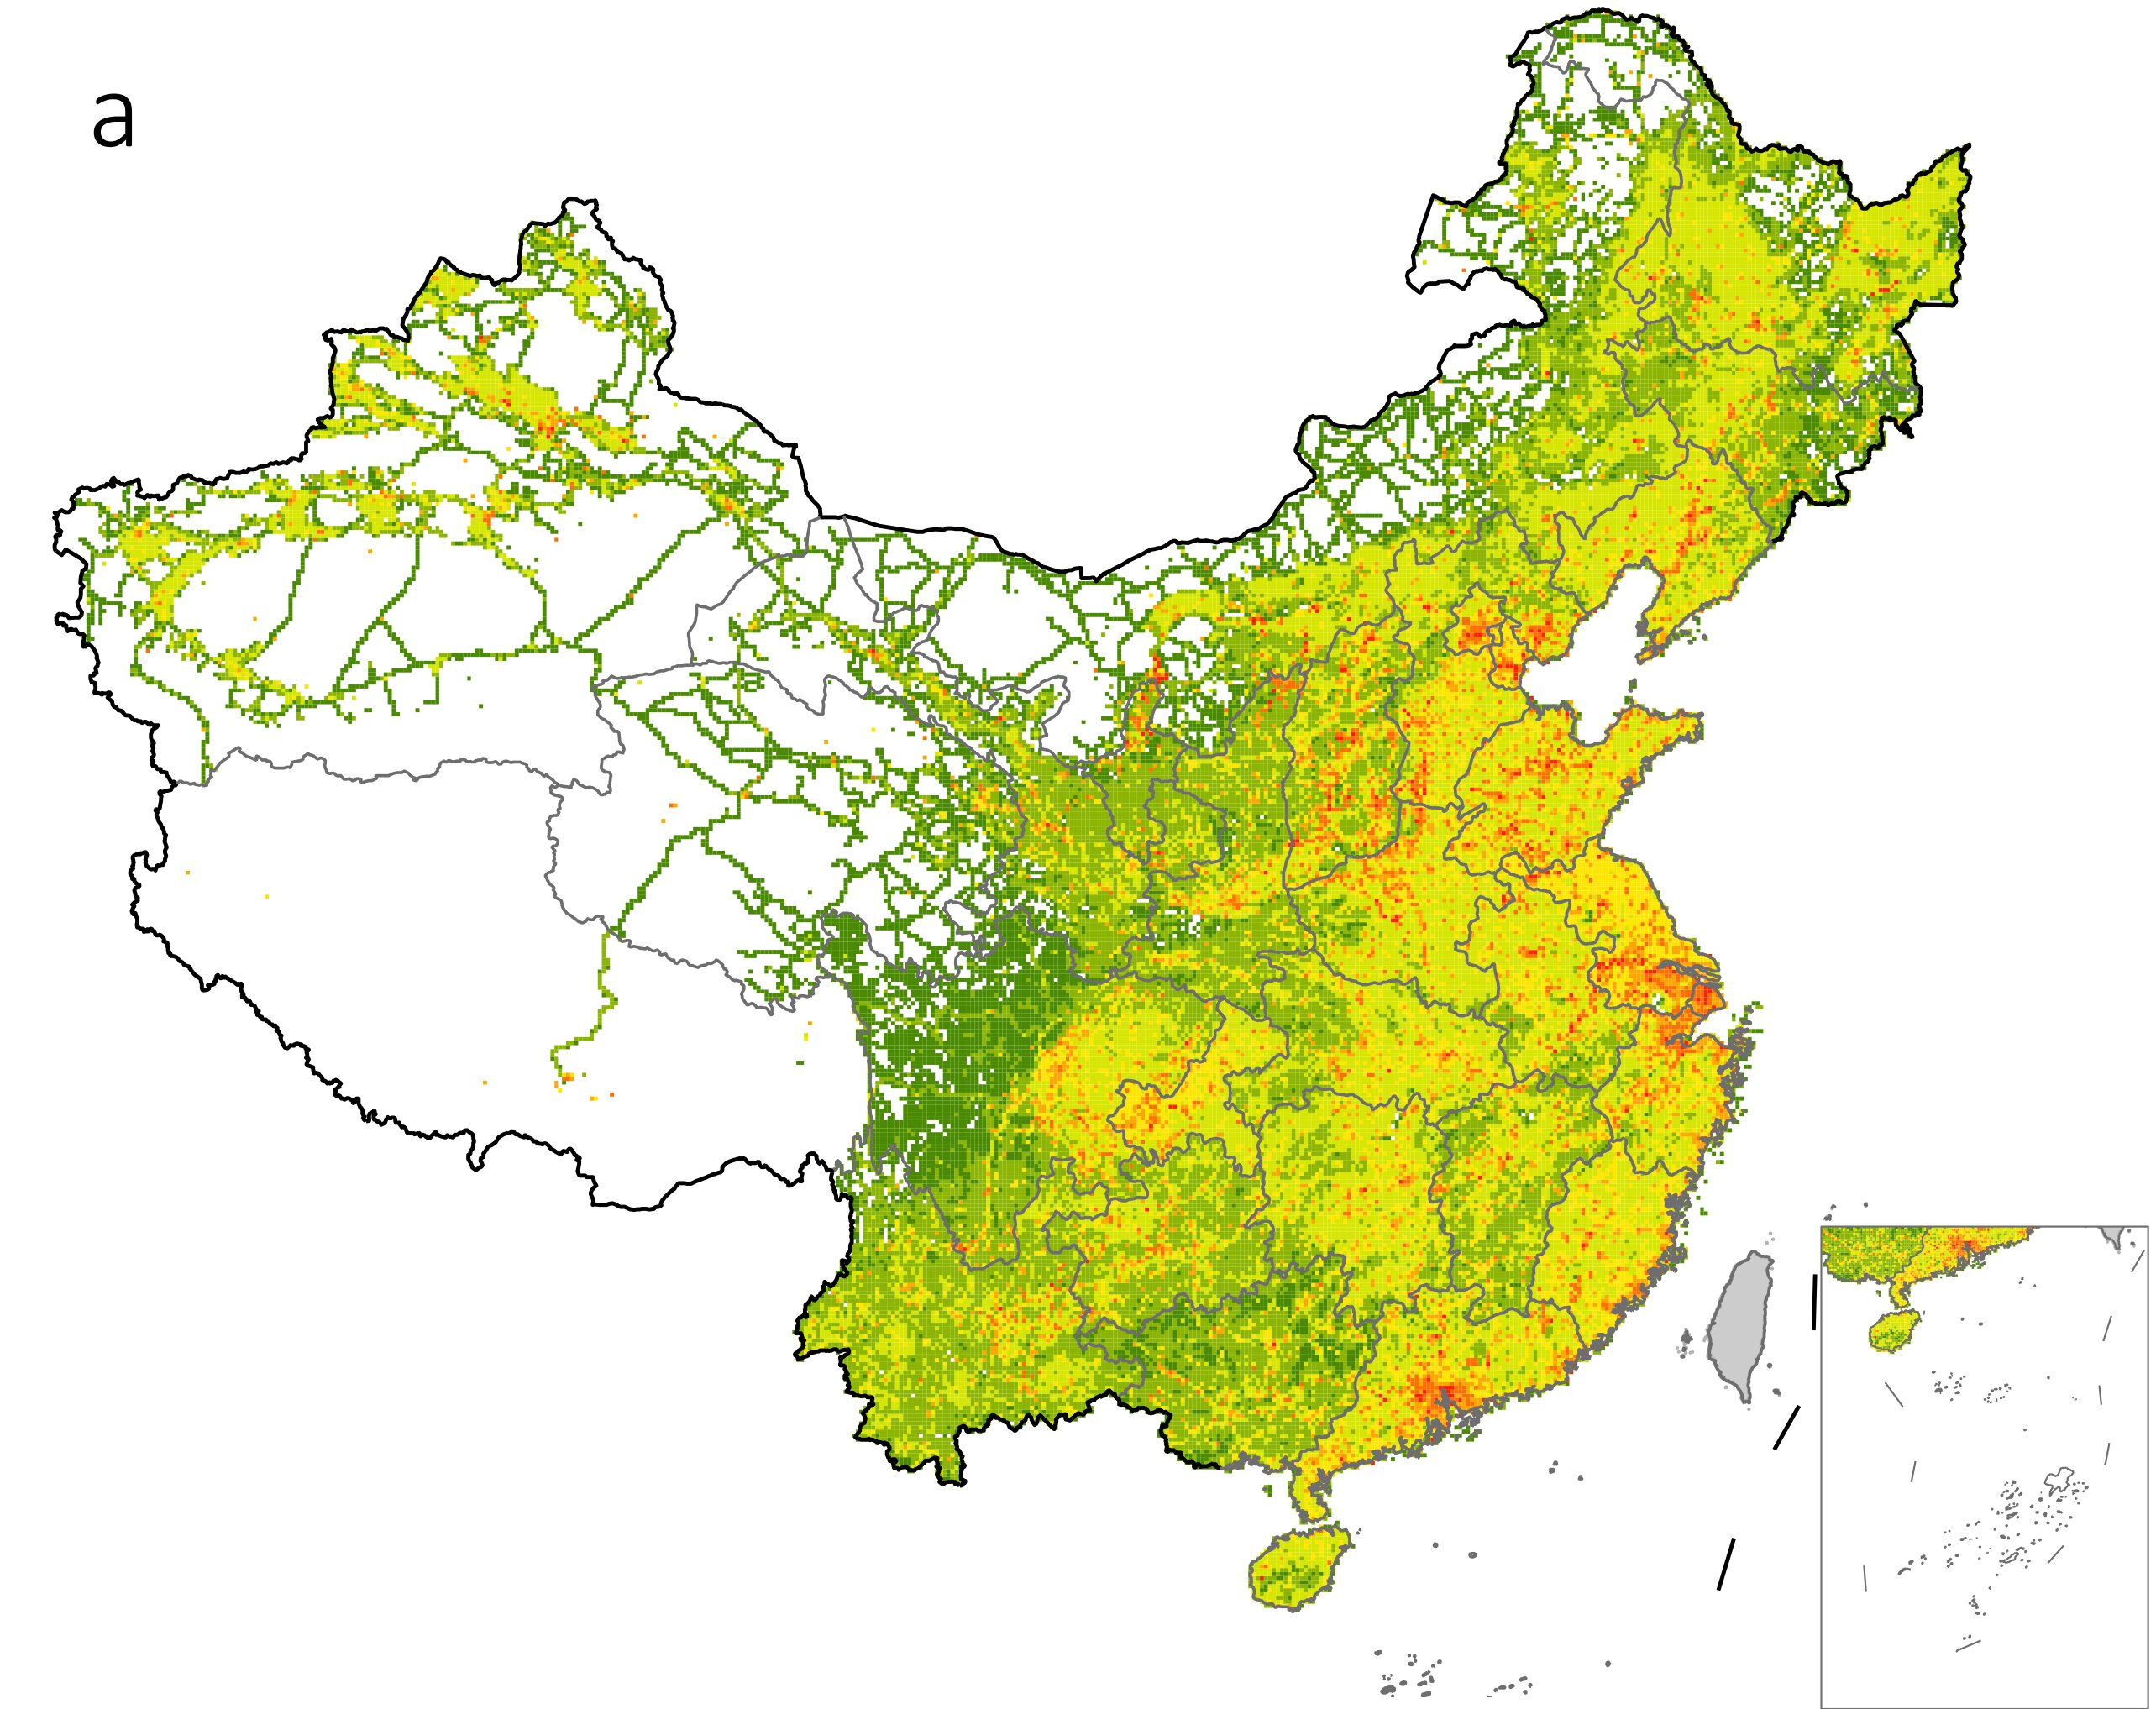 carbon-footprint-hotspots-mapping-china-s-export-driven-emissions